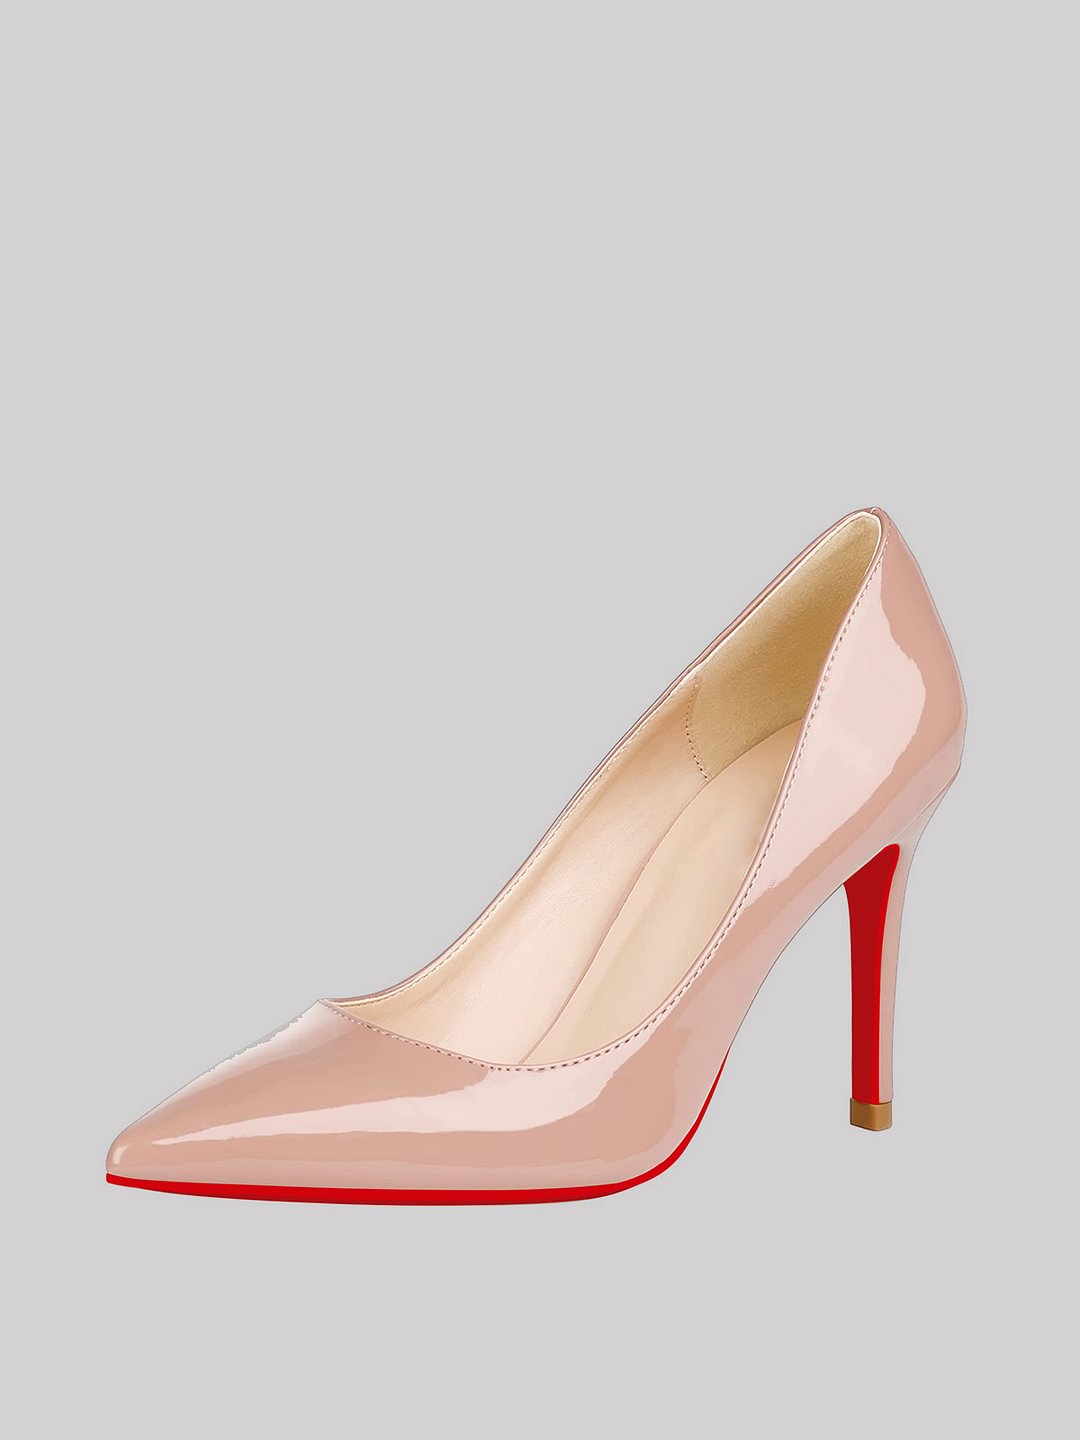 90mm Women's Middle Heels Closed Pointed Toe Red Bottom Pumps Patent Shoes for Wedding